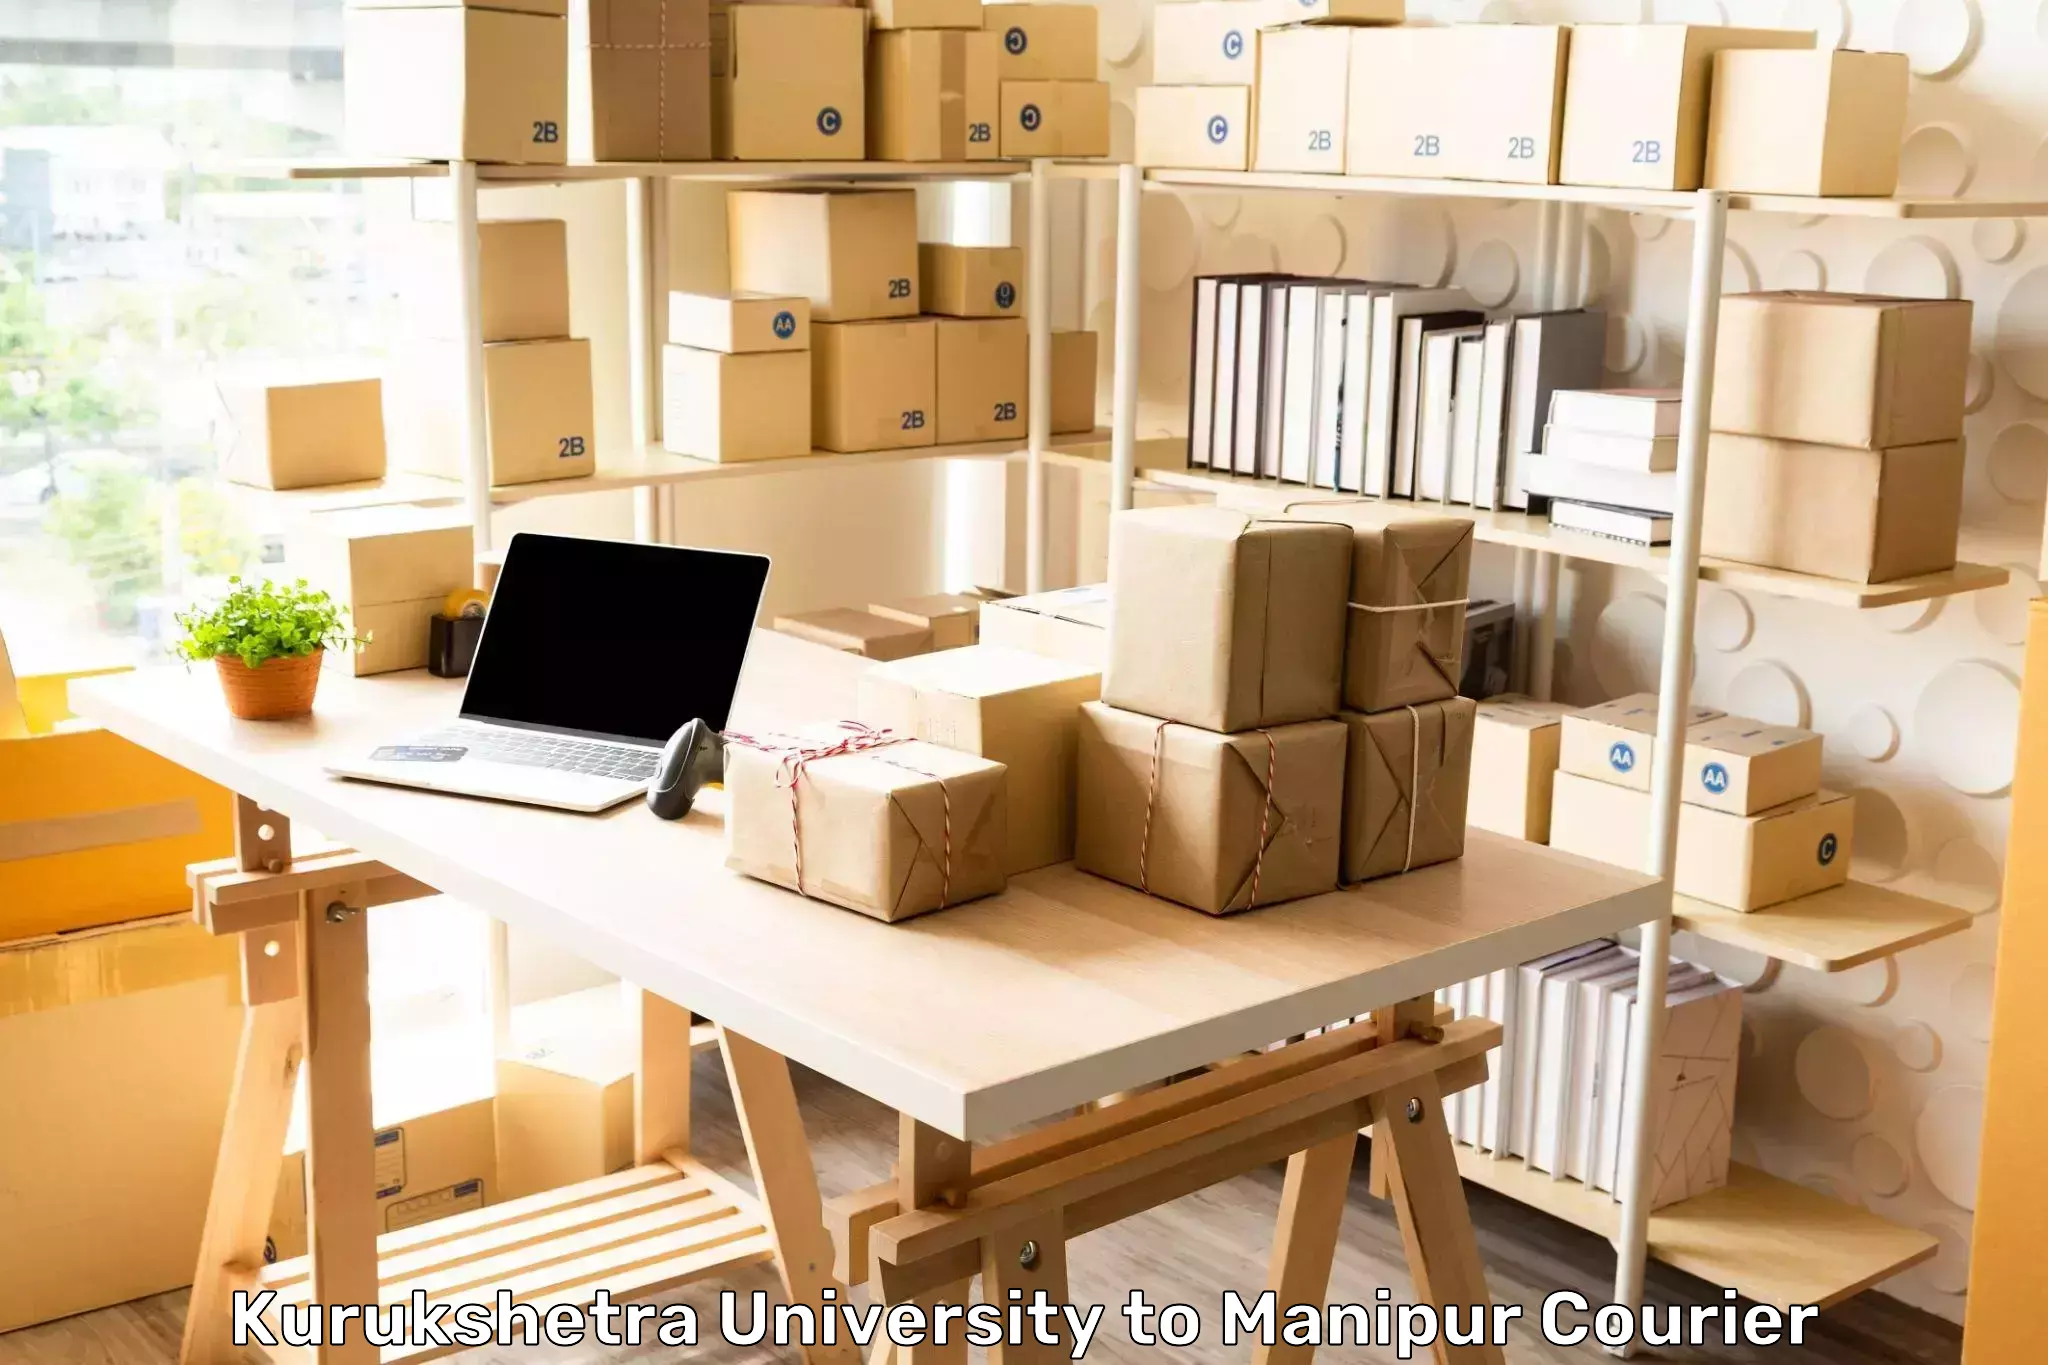 Express package delivery in Kurukshetra University to Manipur